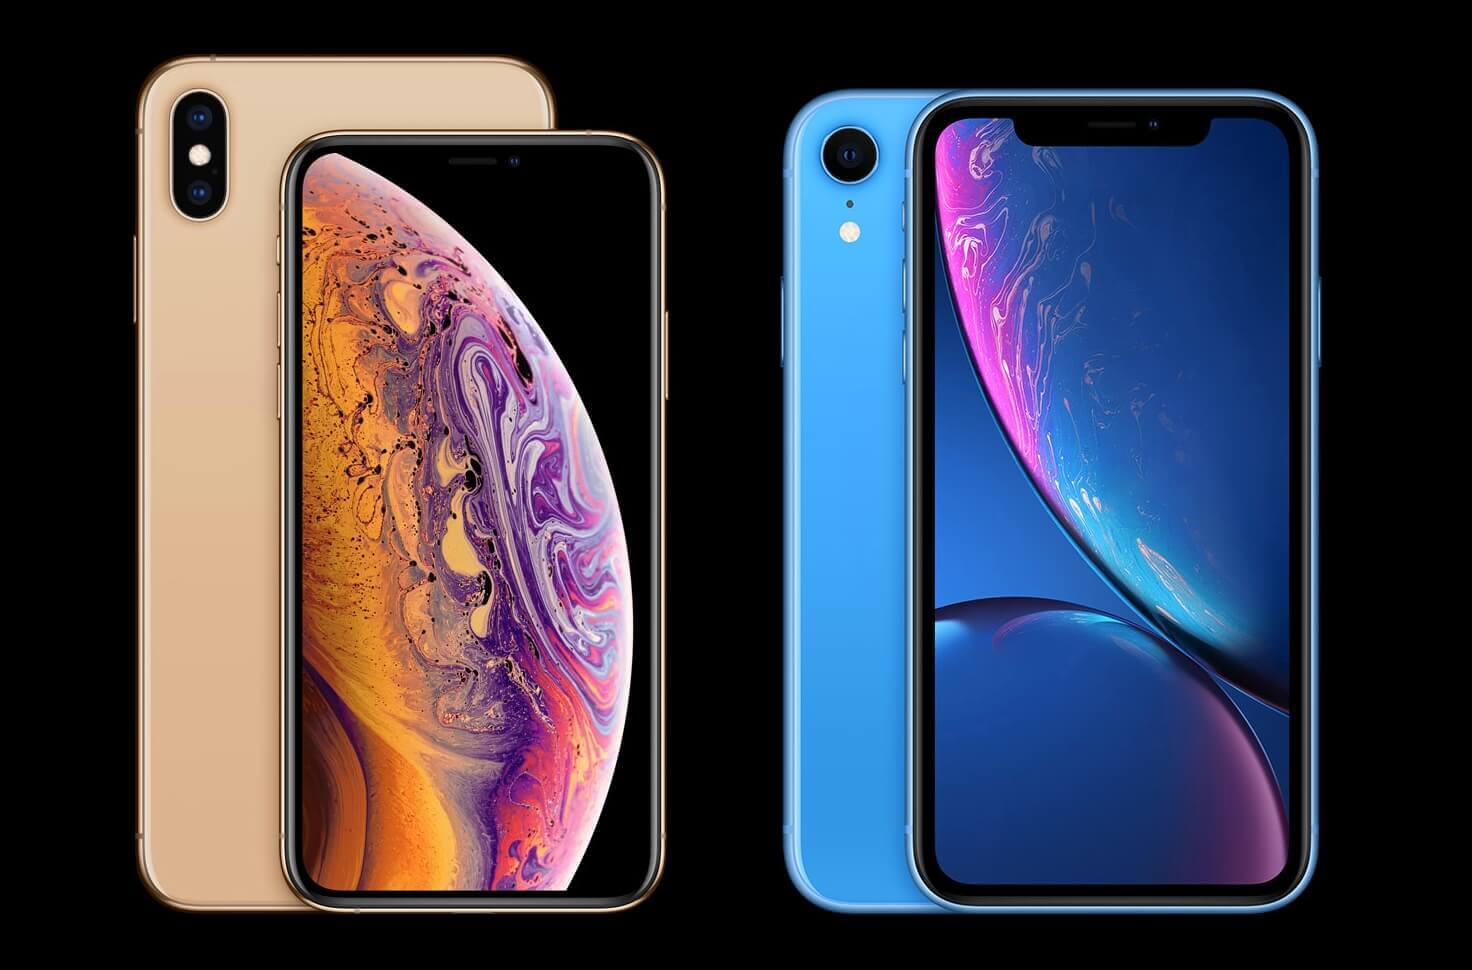 iPhone Xs and iPhone Xr